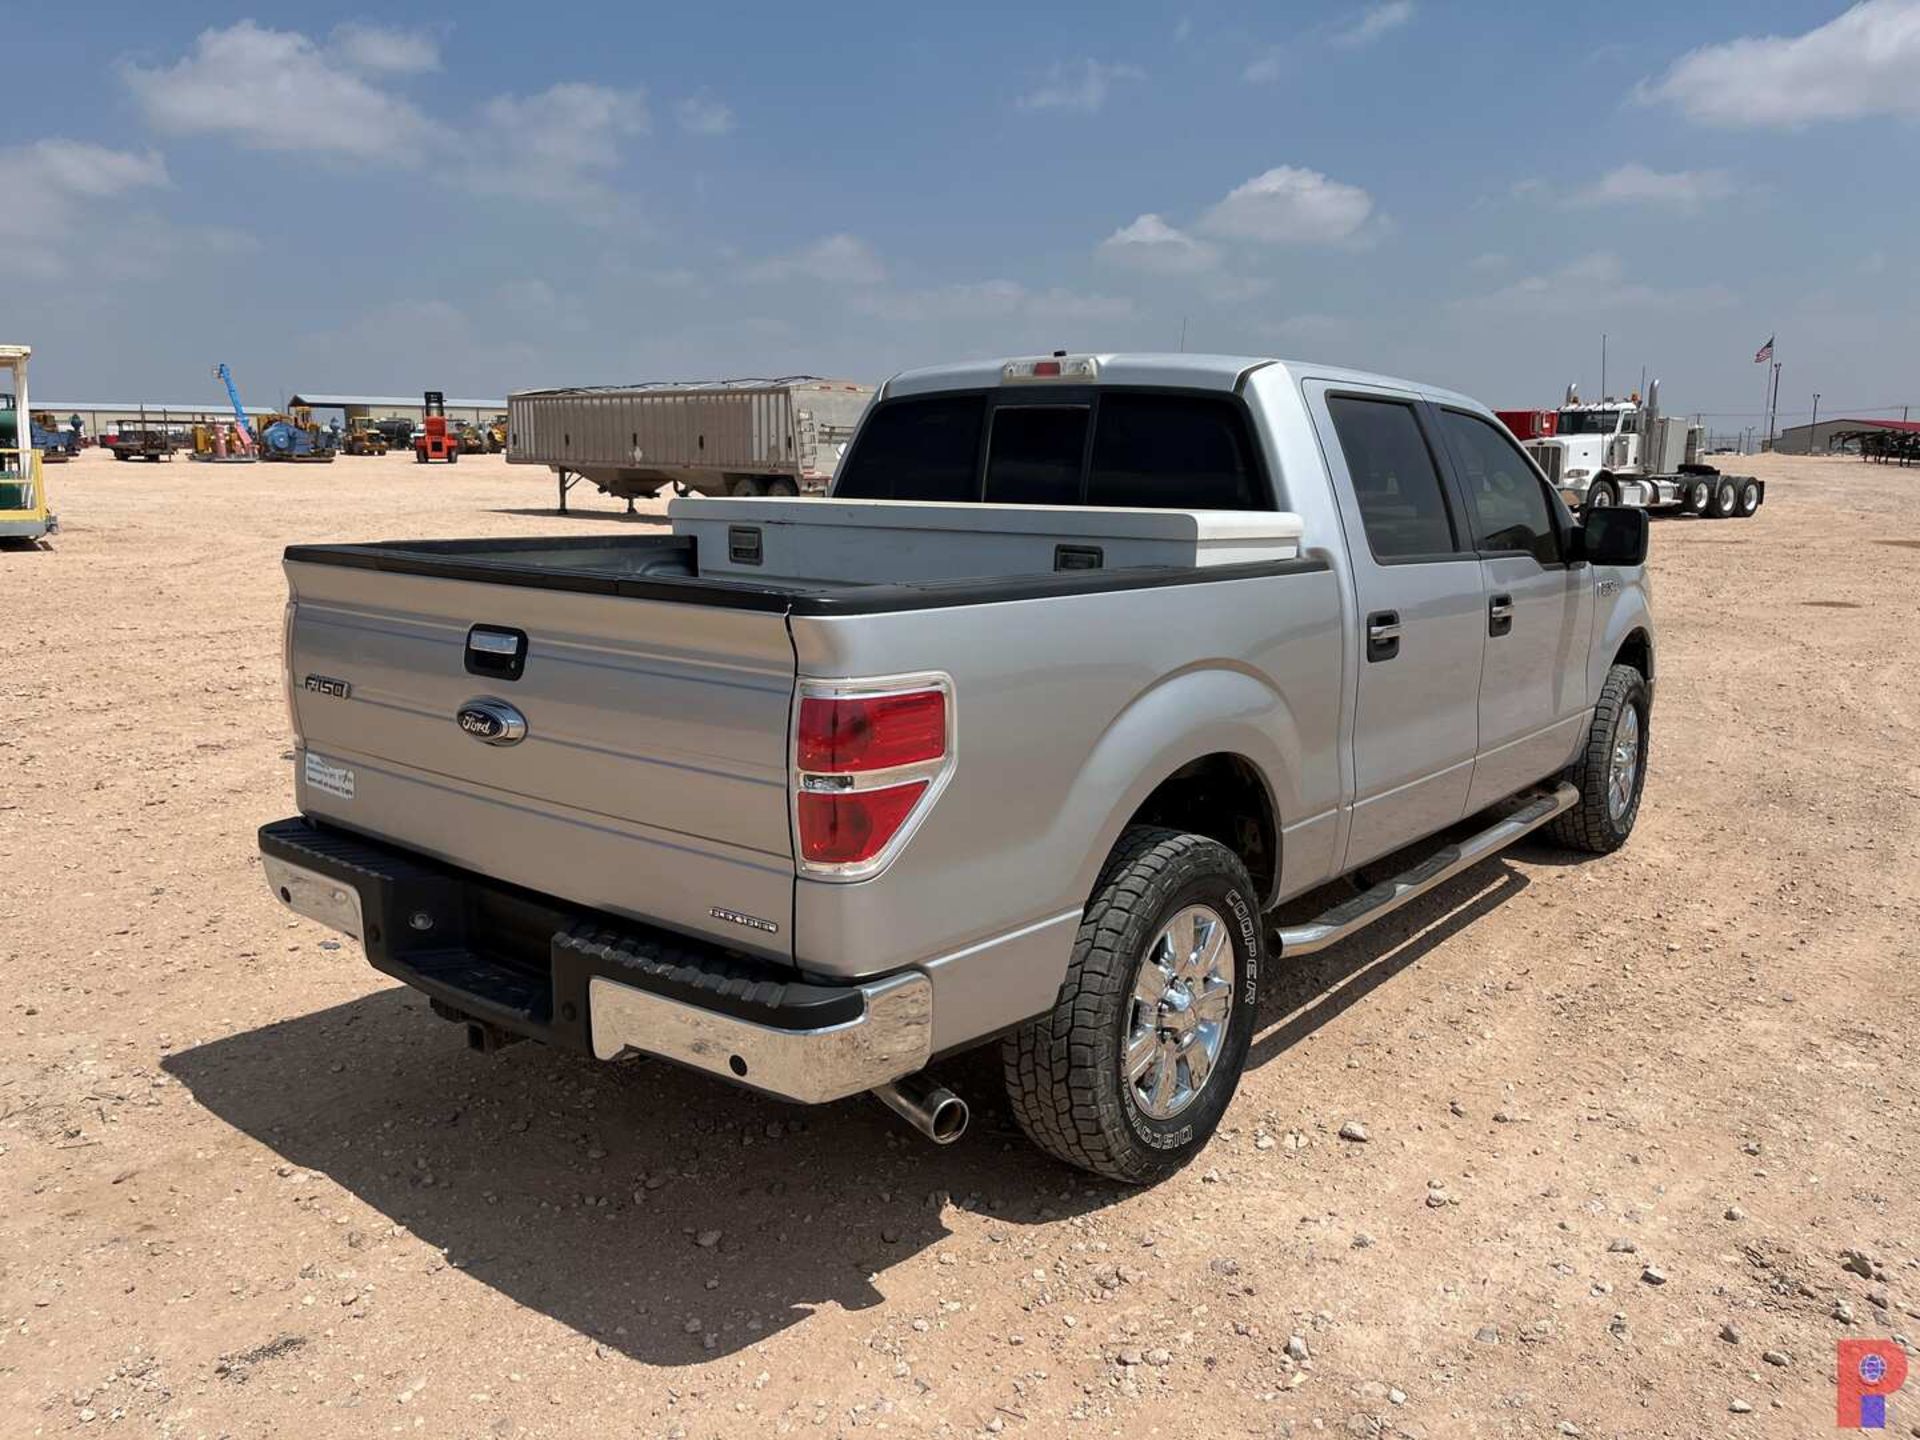 2012 FORD F-150 CREW CAB PICKUP TRUCK - Image 3 of 7